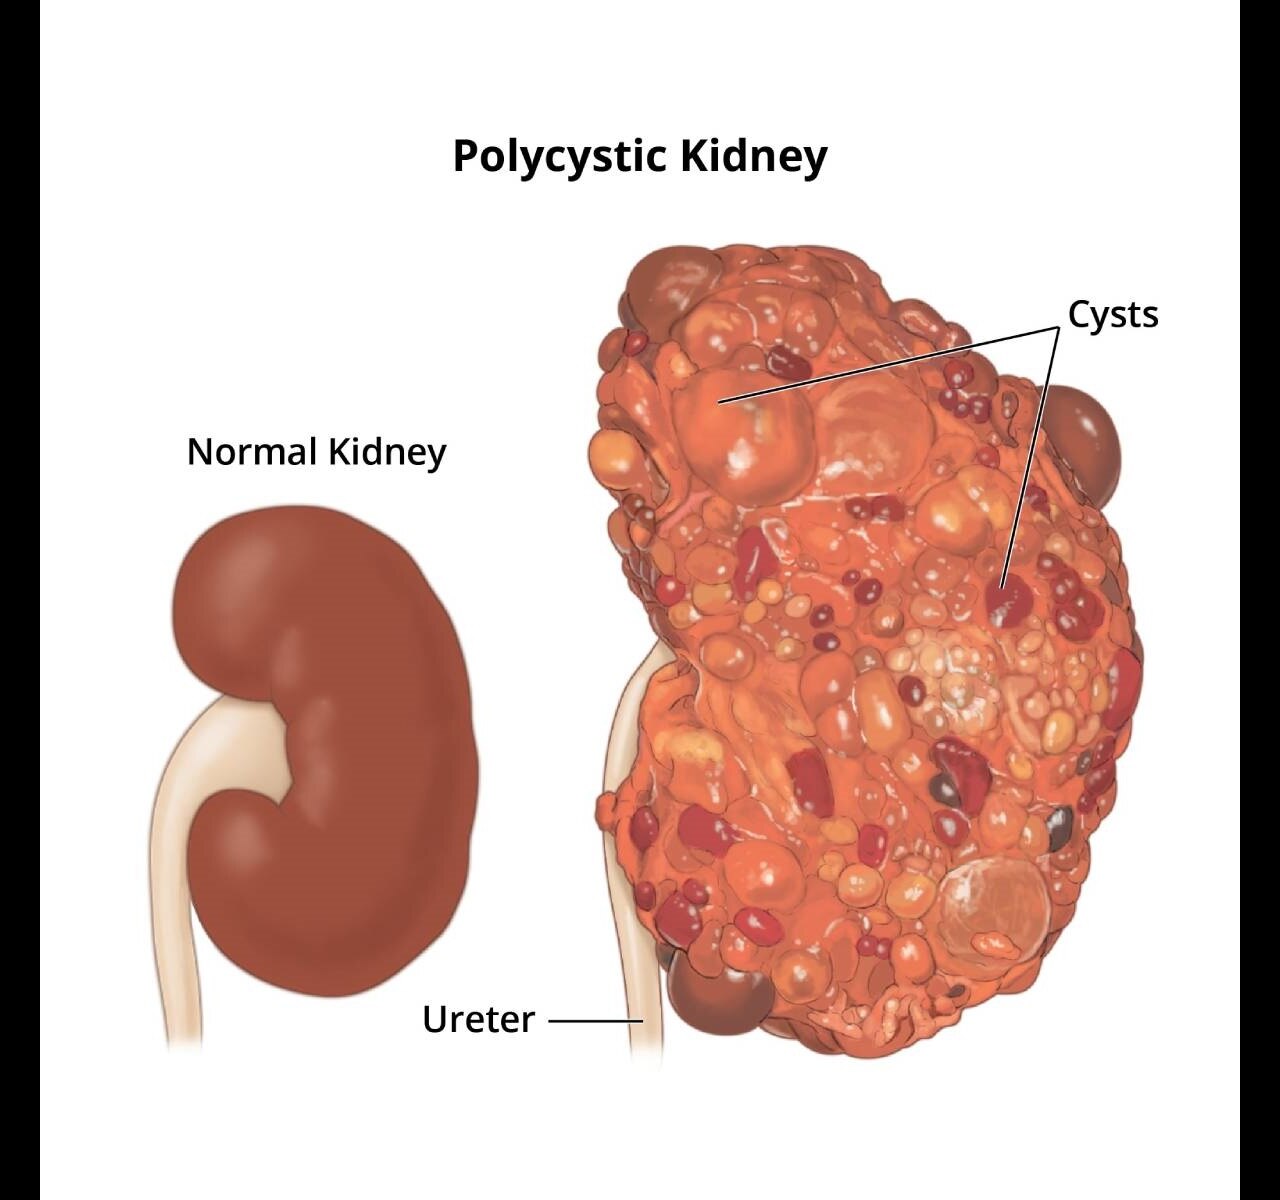 An illustration of a normal kidney and a polycystic kidney.